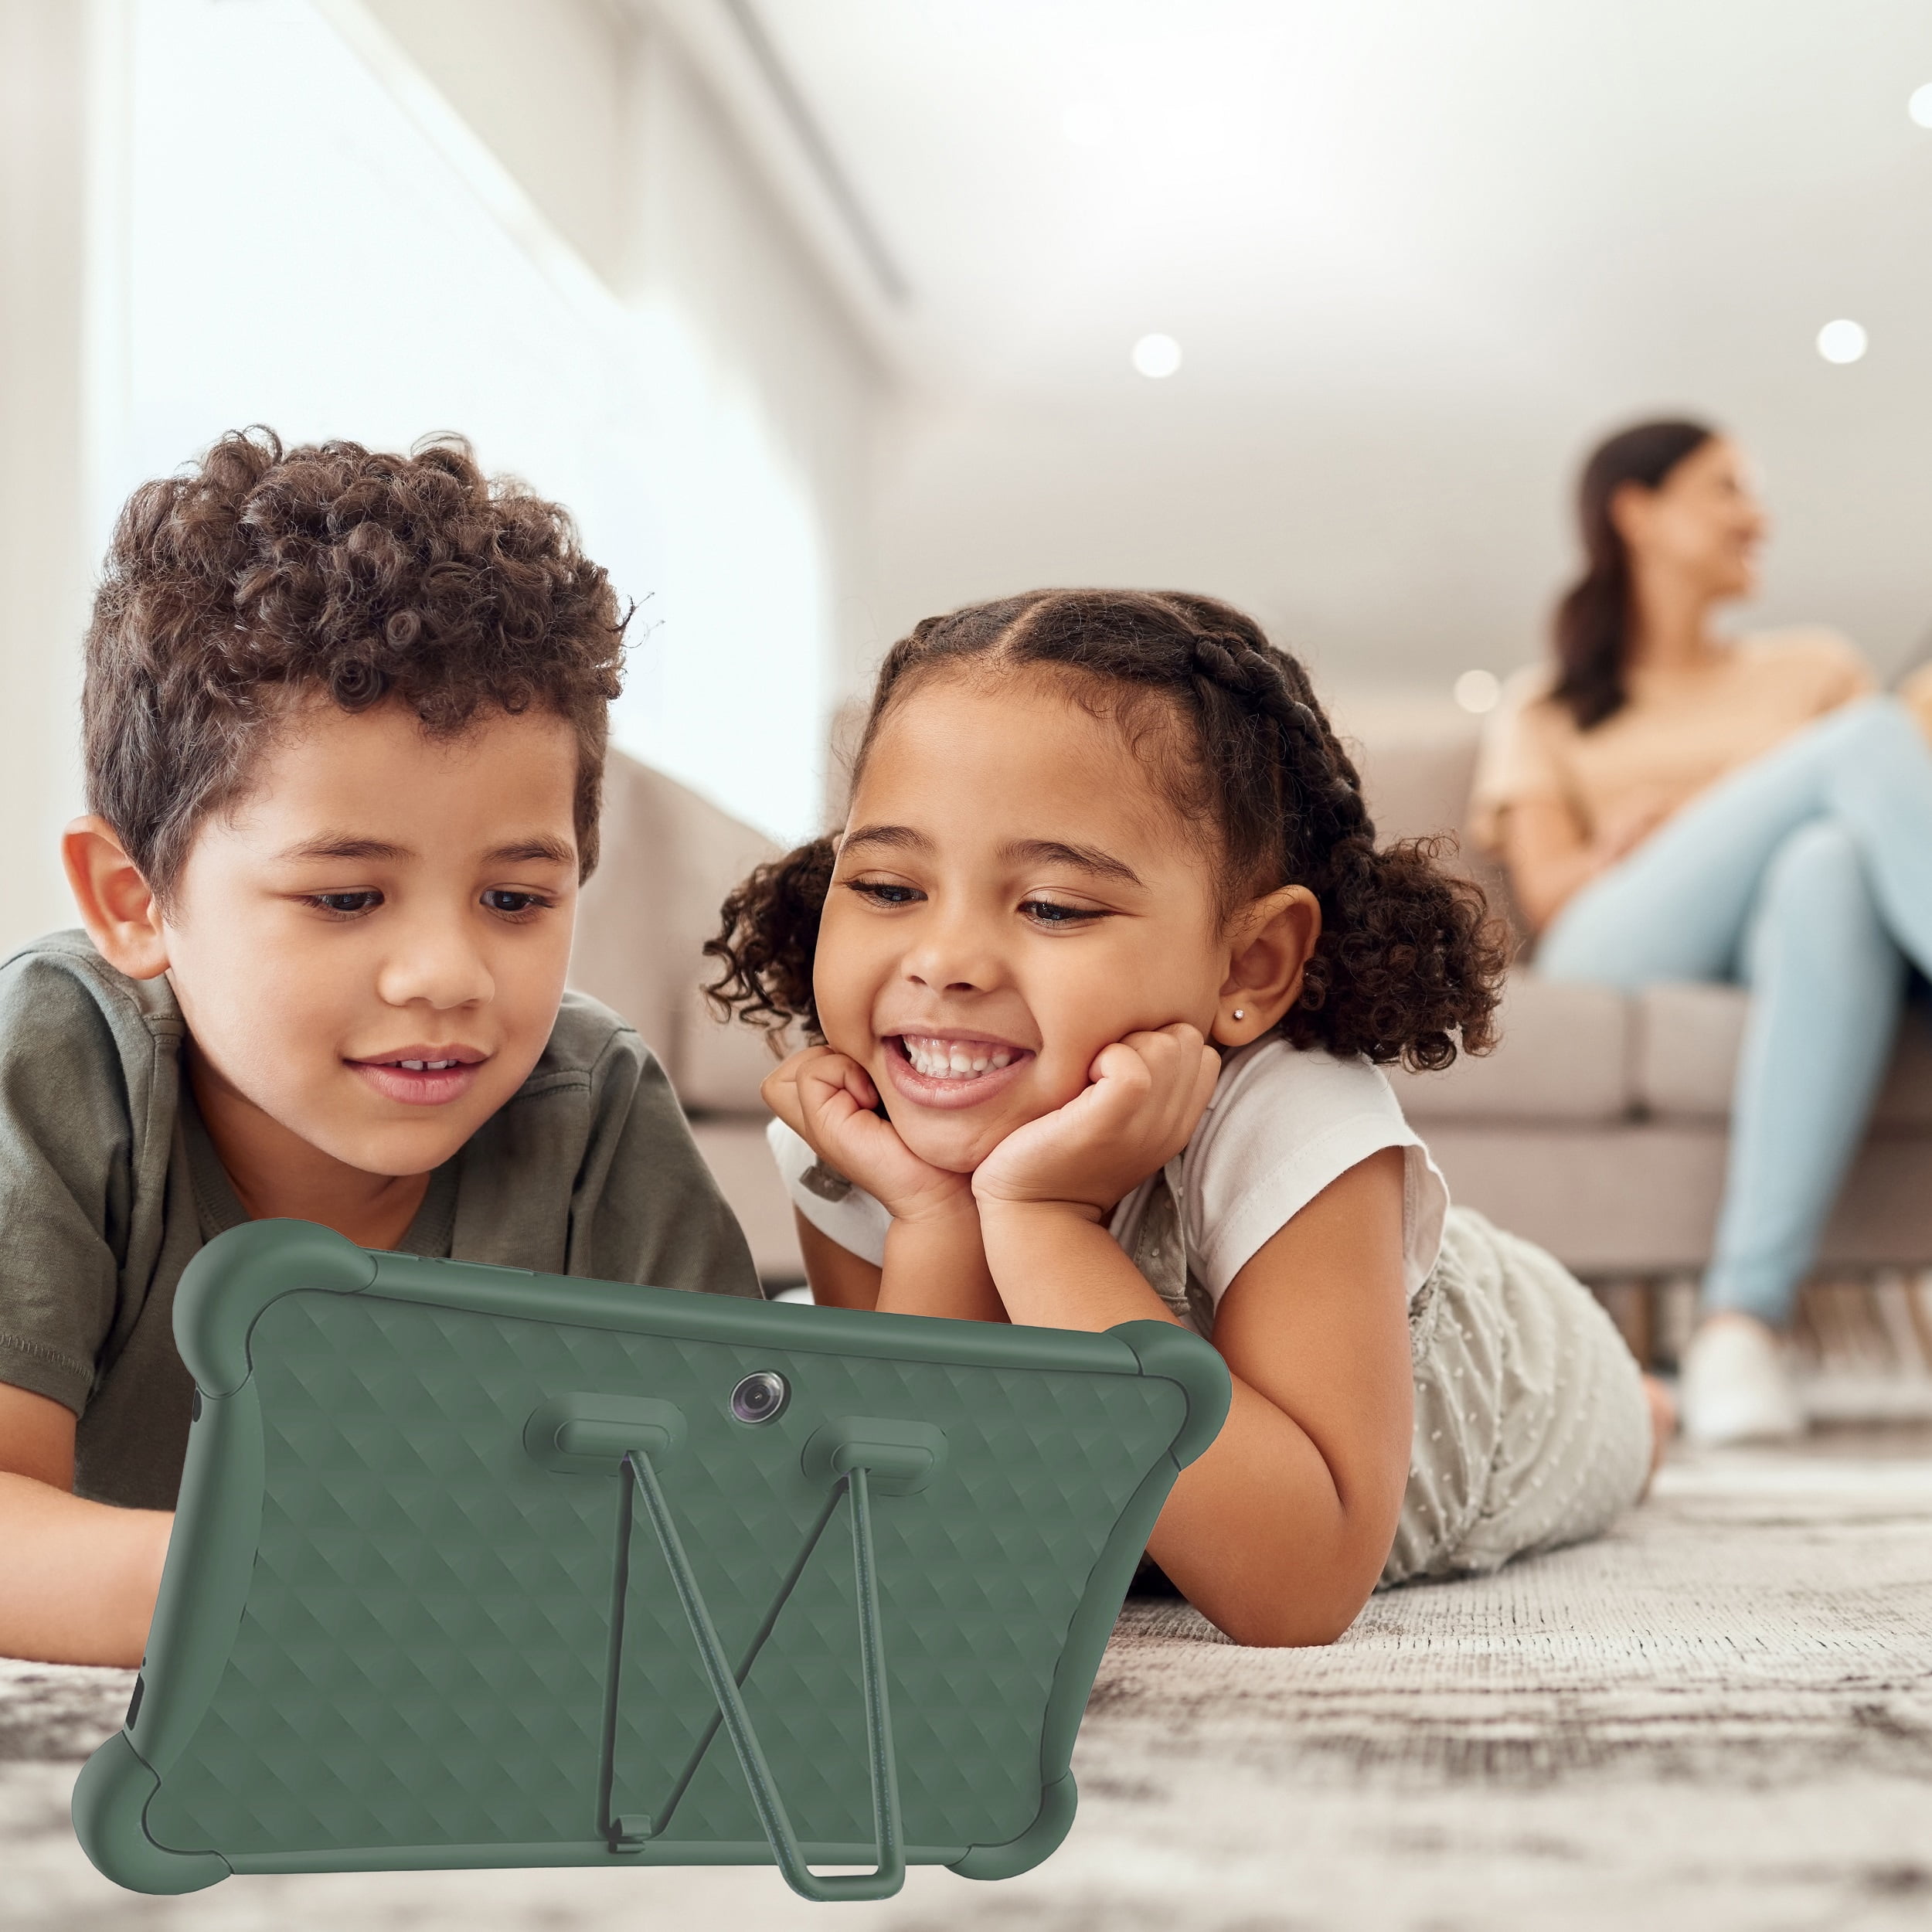 LEXiBOOK LAPTAB® 10, Laptop with Touch Screen, Designed for The Whole  Family, Educational and Fun Content, Powered by Android™, Parental Control,  Ultra Thin and Light, LT10EN : Toys & Games 